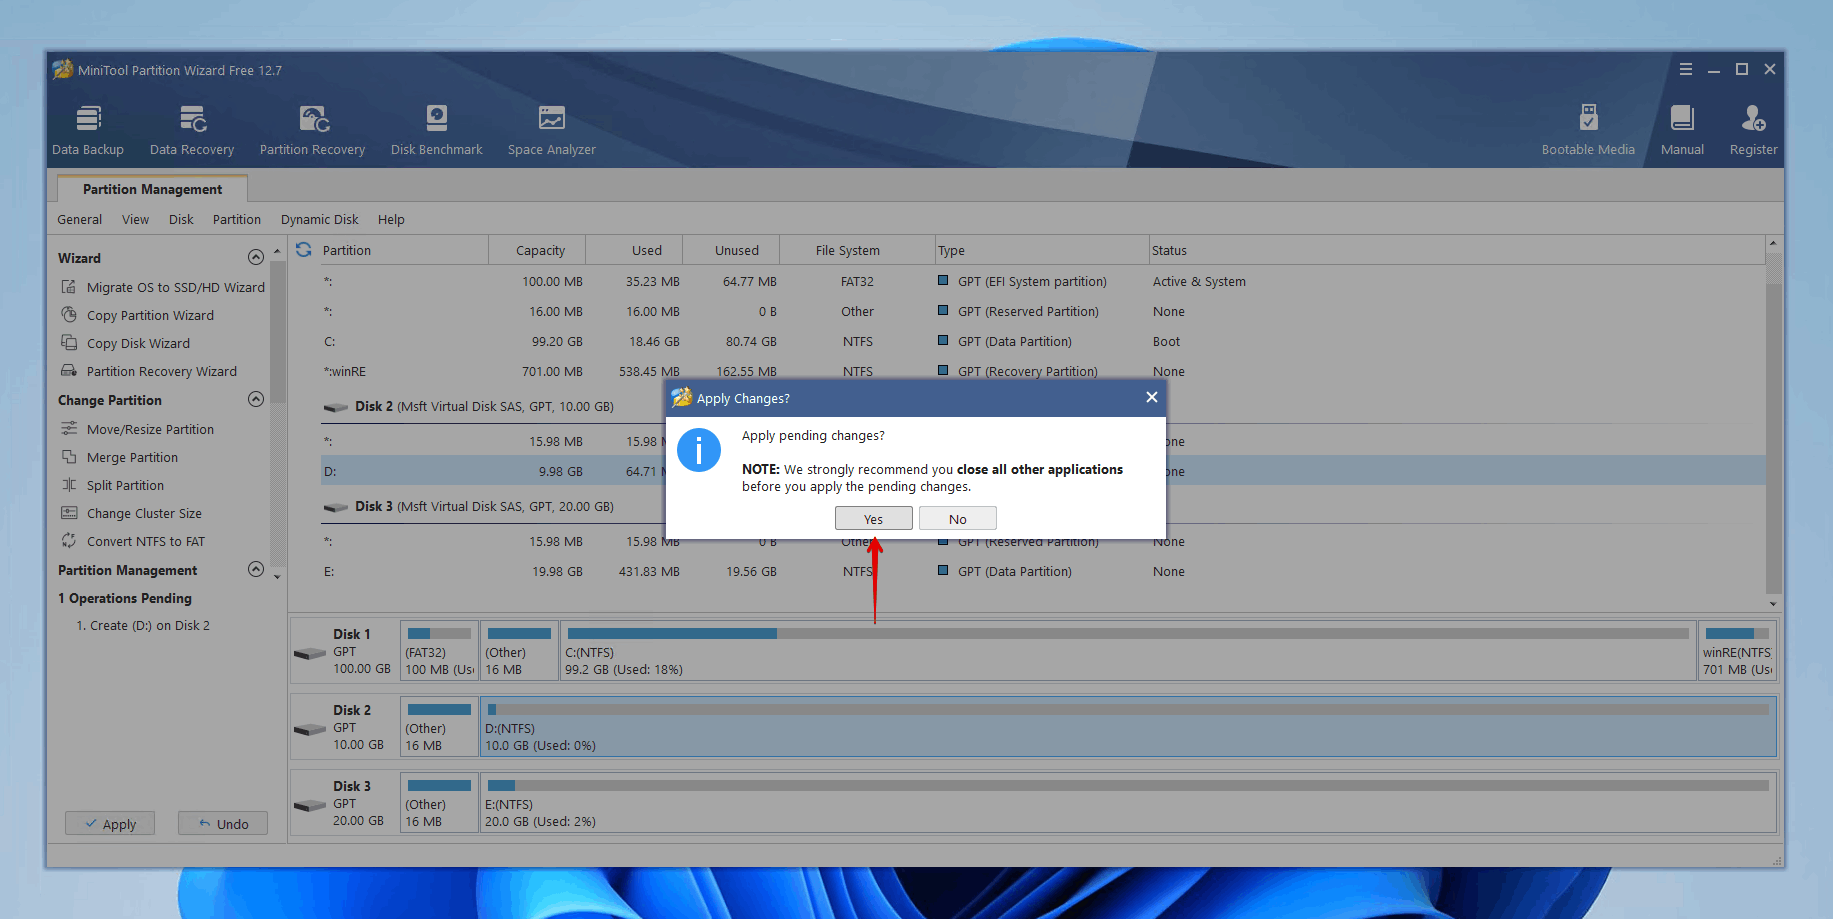 Confirming the MiniTool Partition Wizard changes.